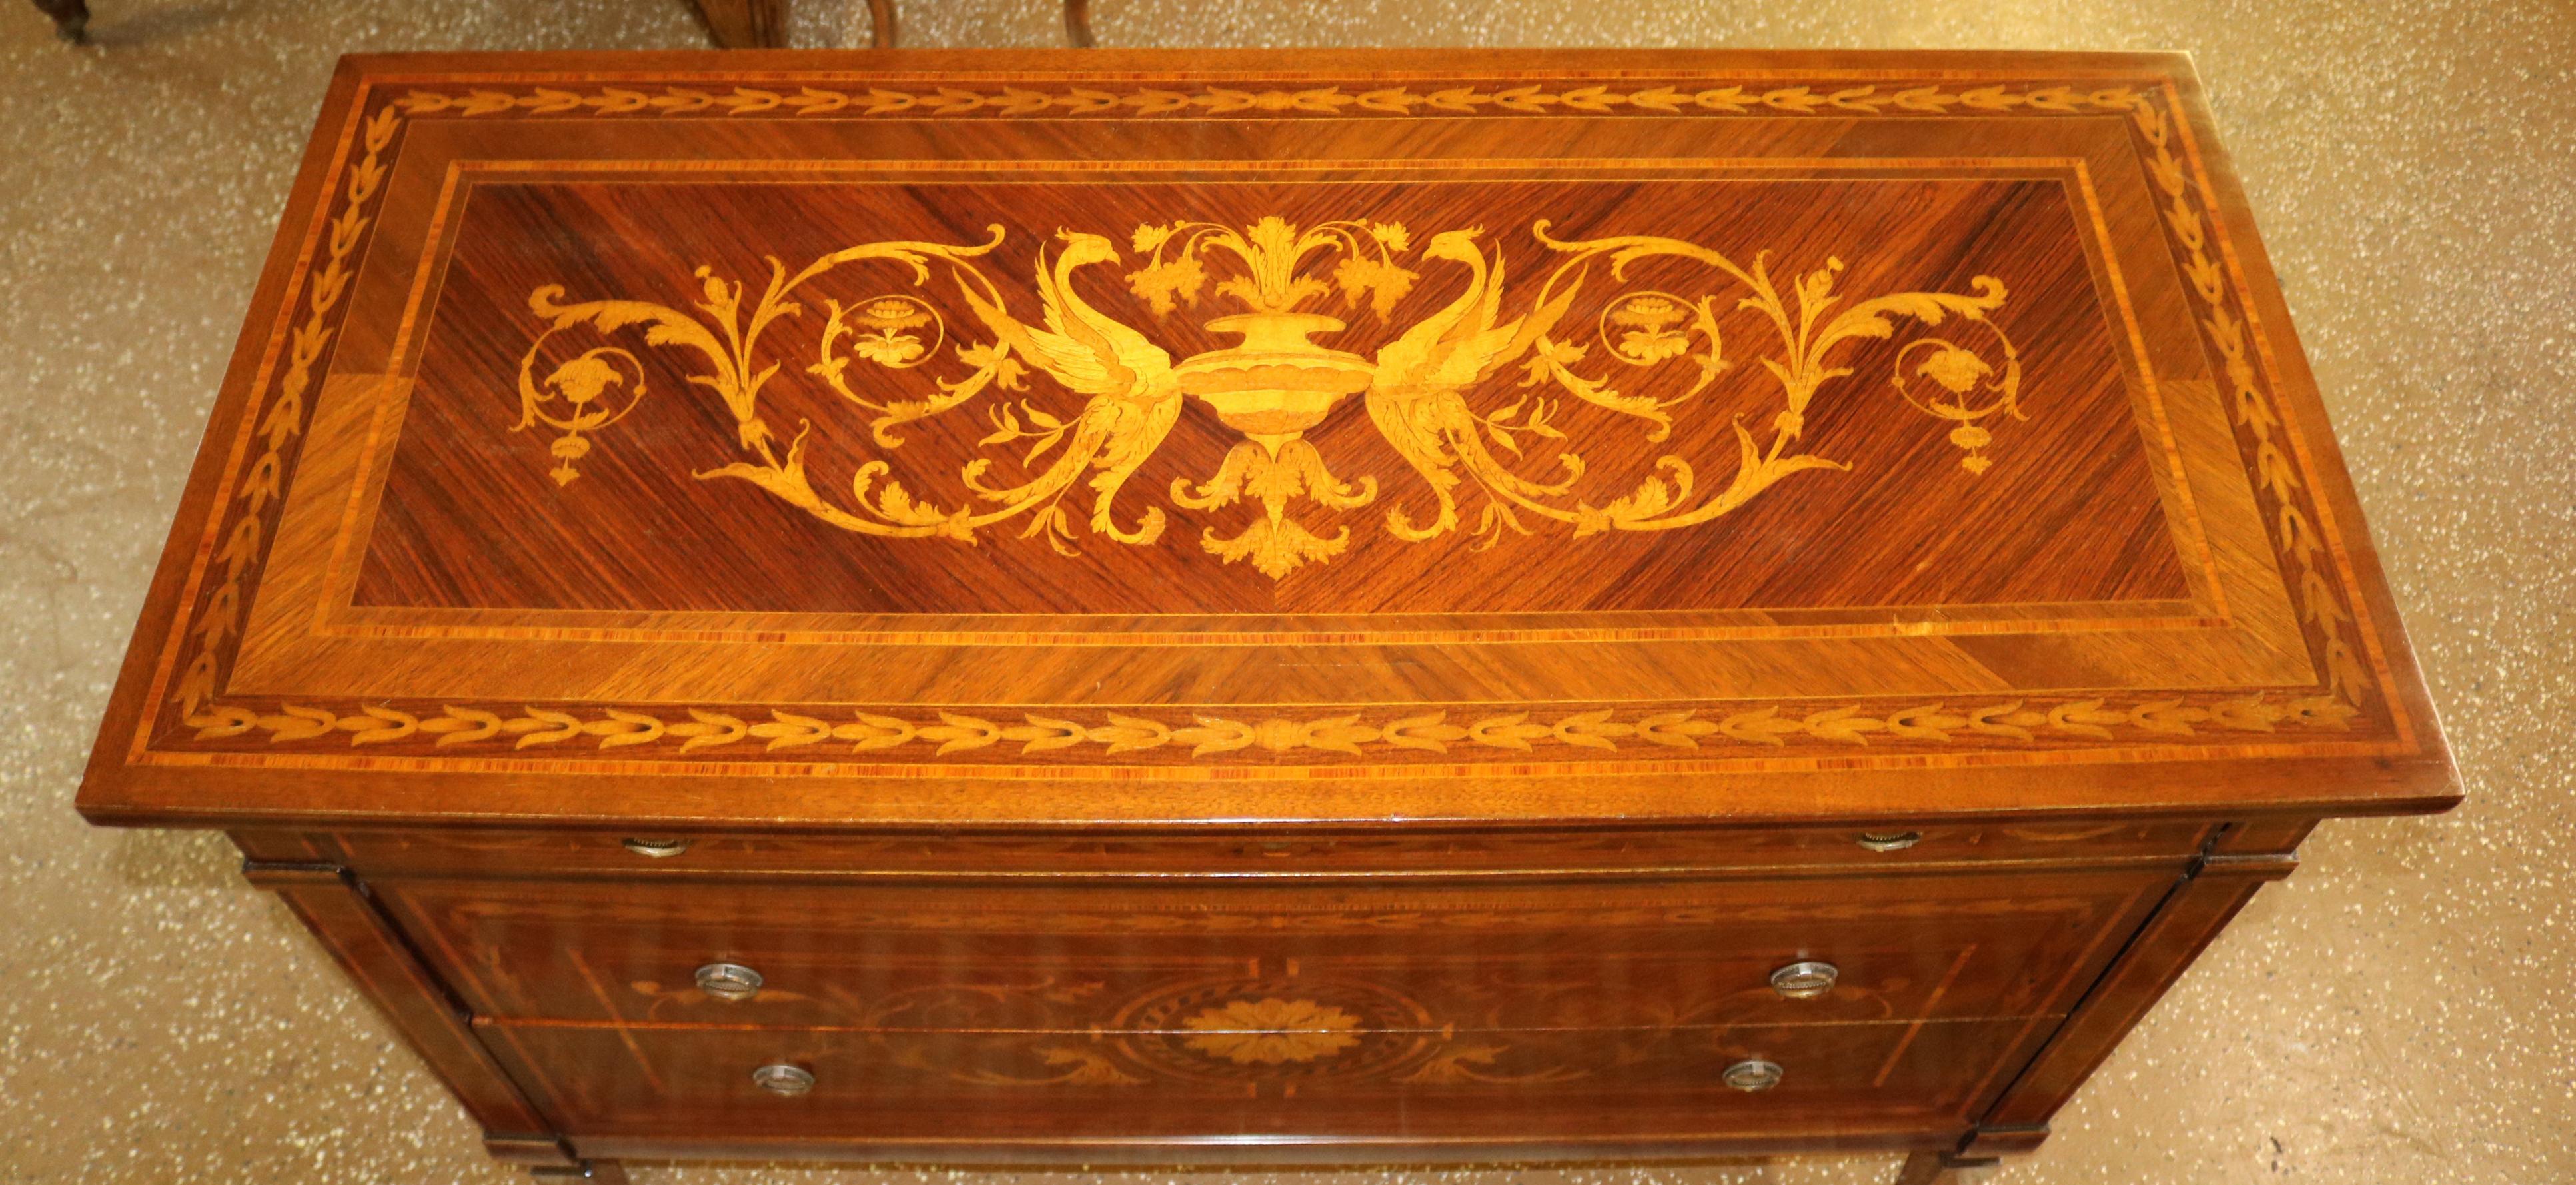 Italian Inlaid Rosewood Commode Dresser Chest of Drawers For Sale 7